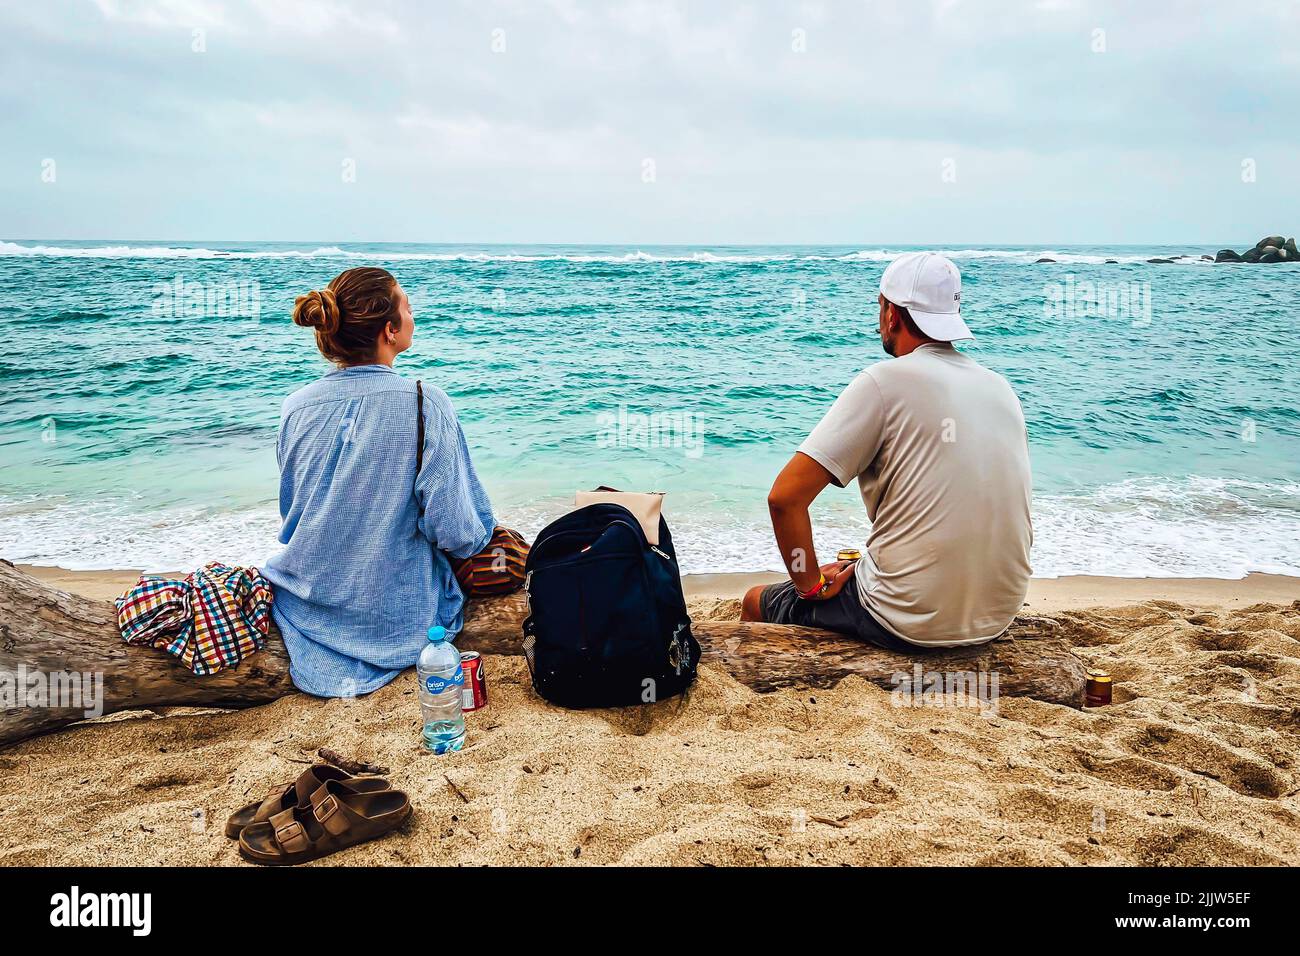 A back view of two friends sitting on the beach and looking at the ocean in Santa Marta, Colombia Stock Photo